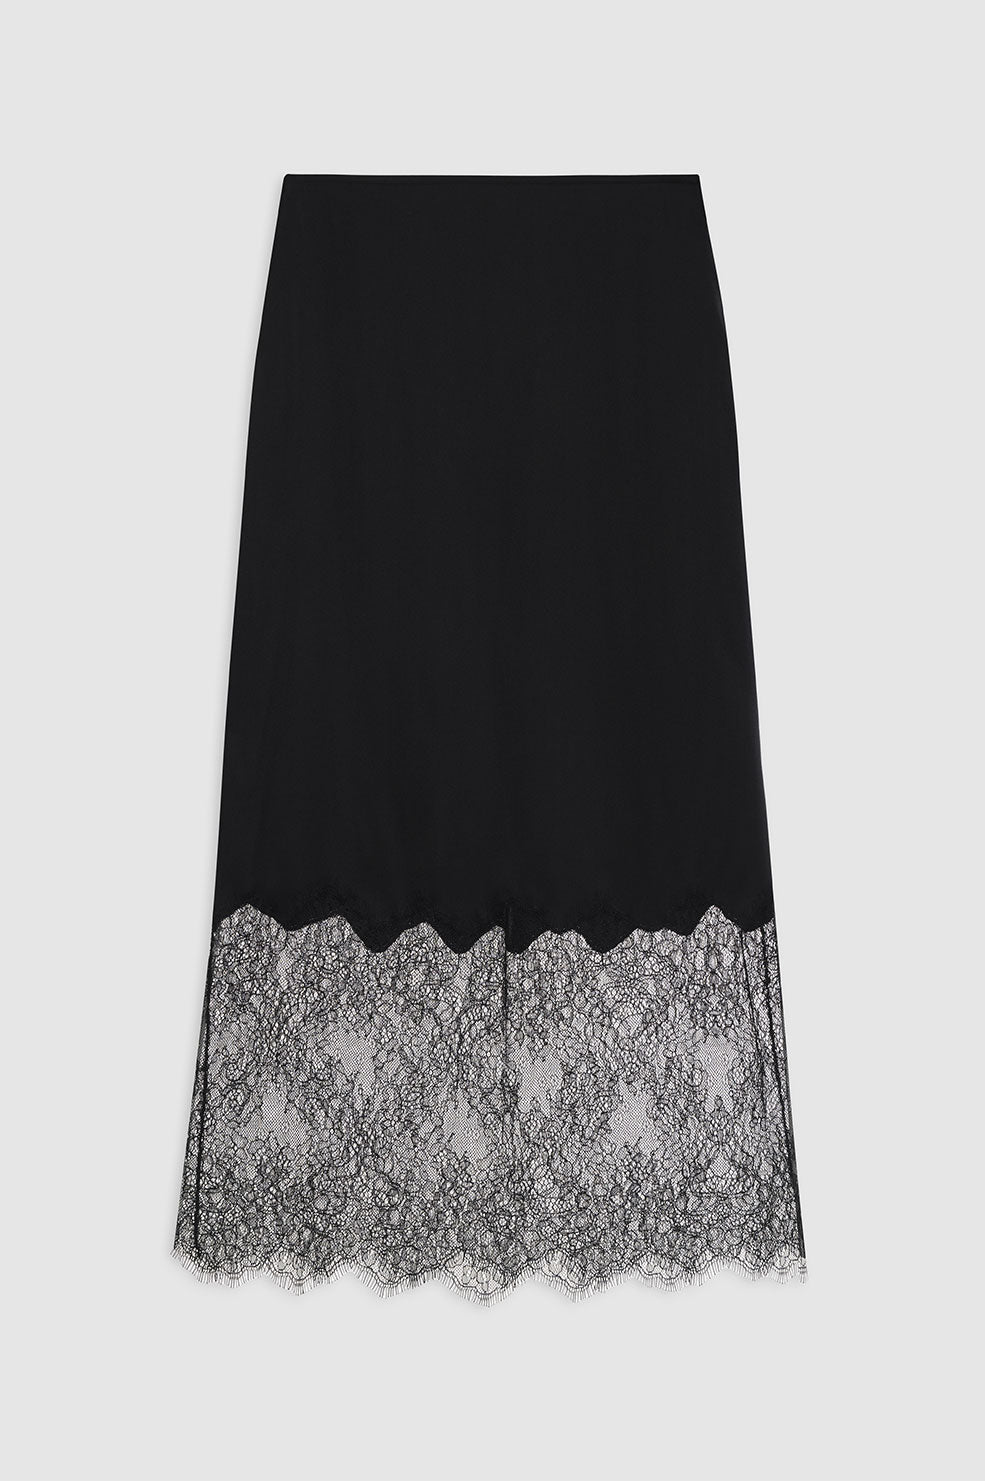 ANINE BING Amelie Skirt - Black - Front VIew